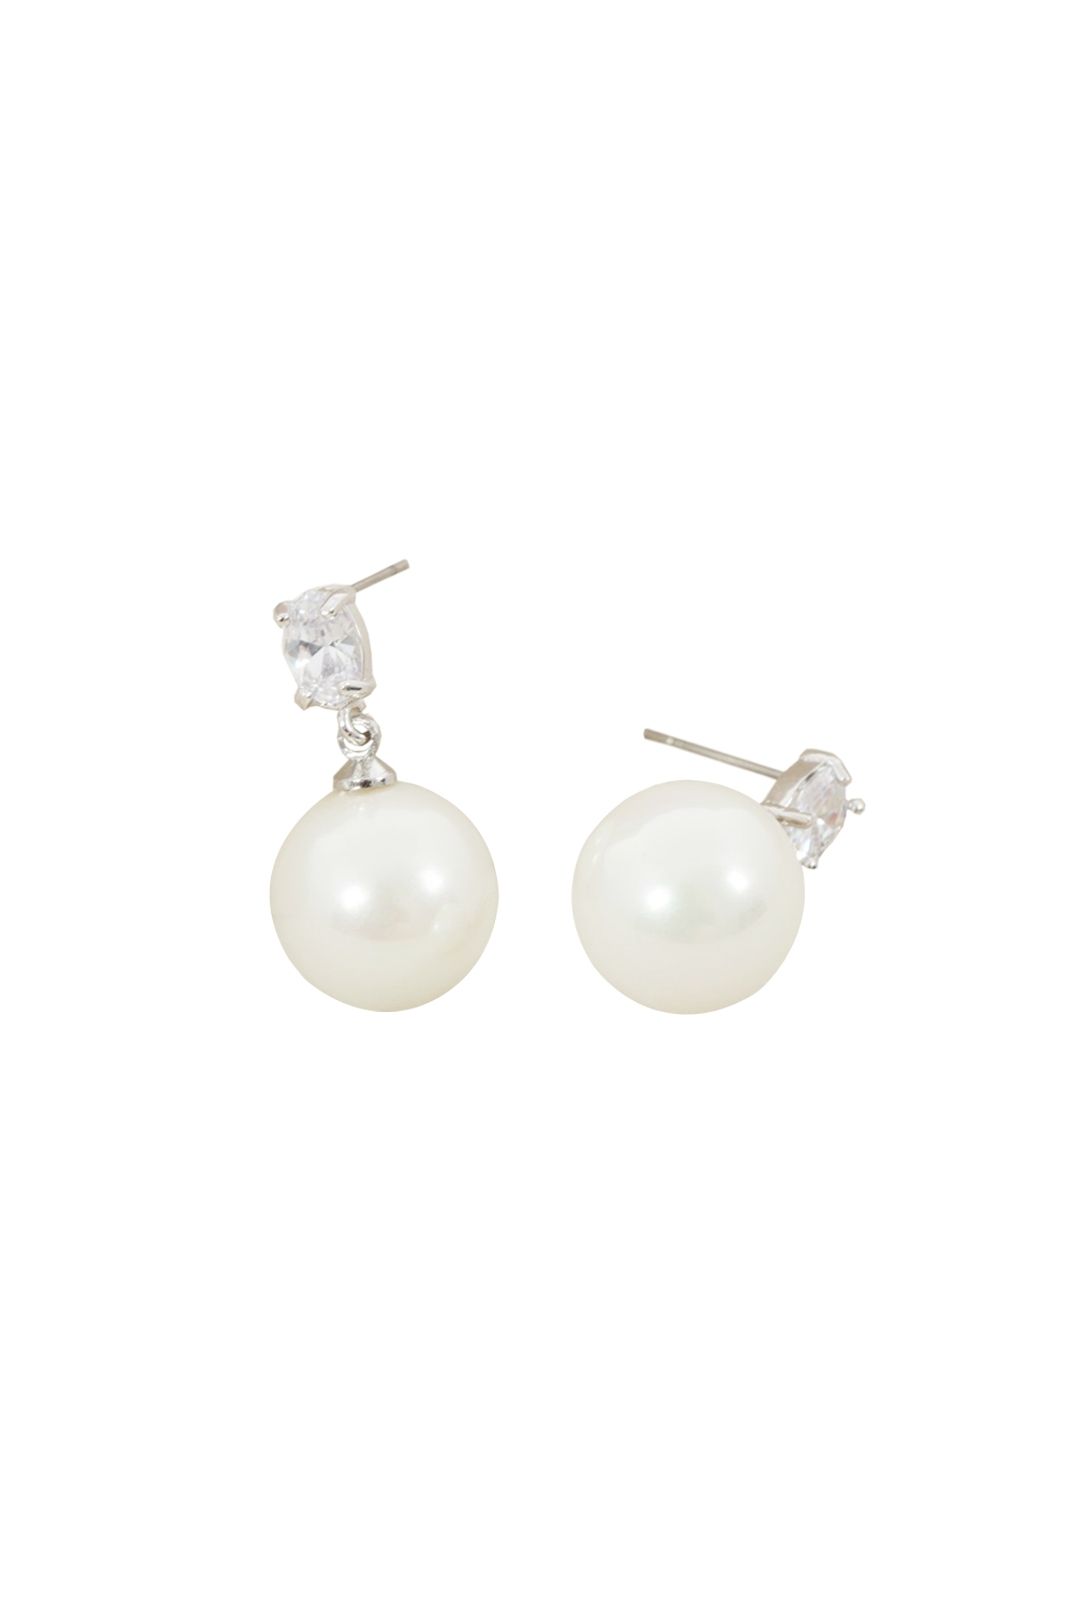 Adorne - Faux Pearl Drop Mini CZ Crystal Stud Earring - Silver White - Front